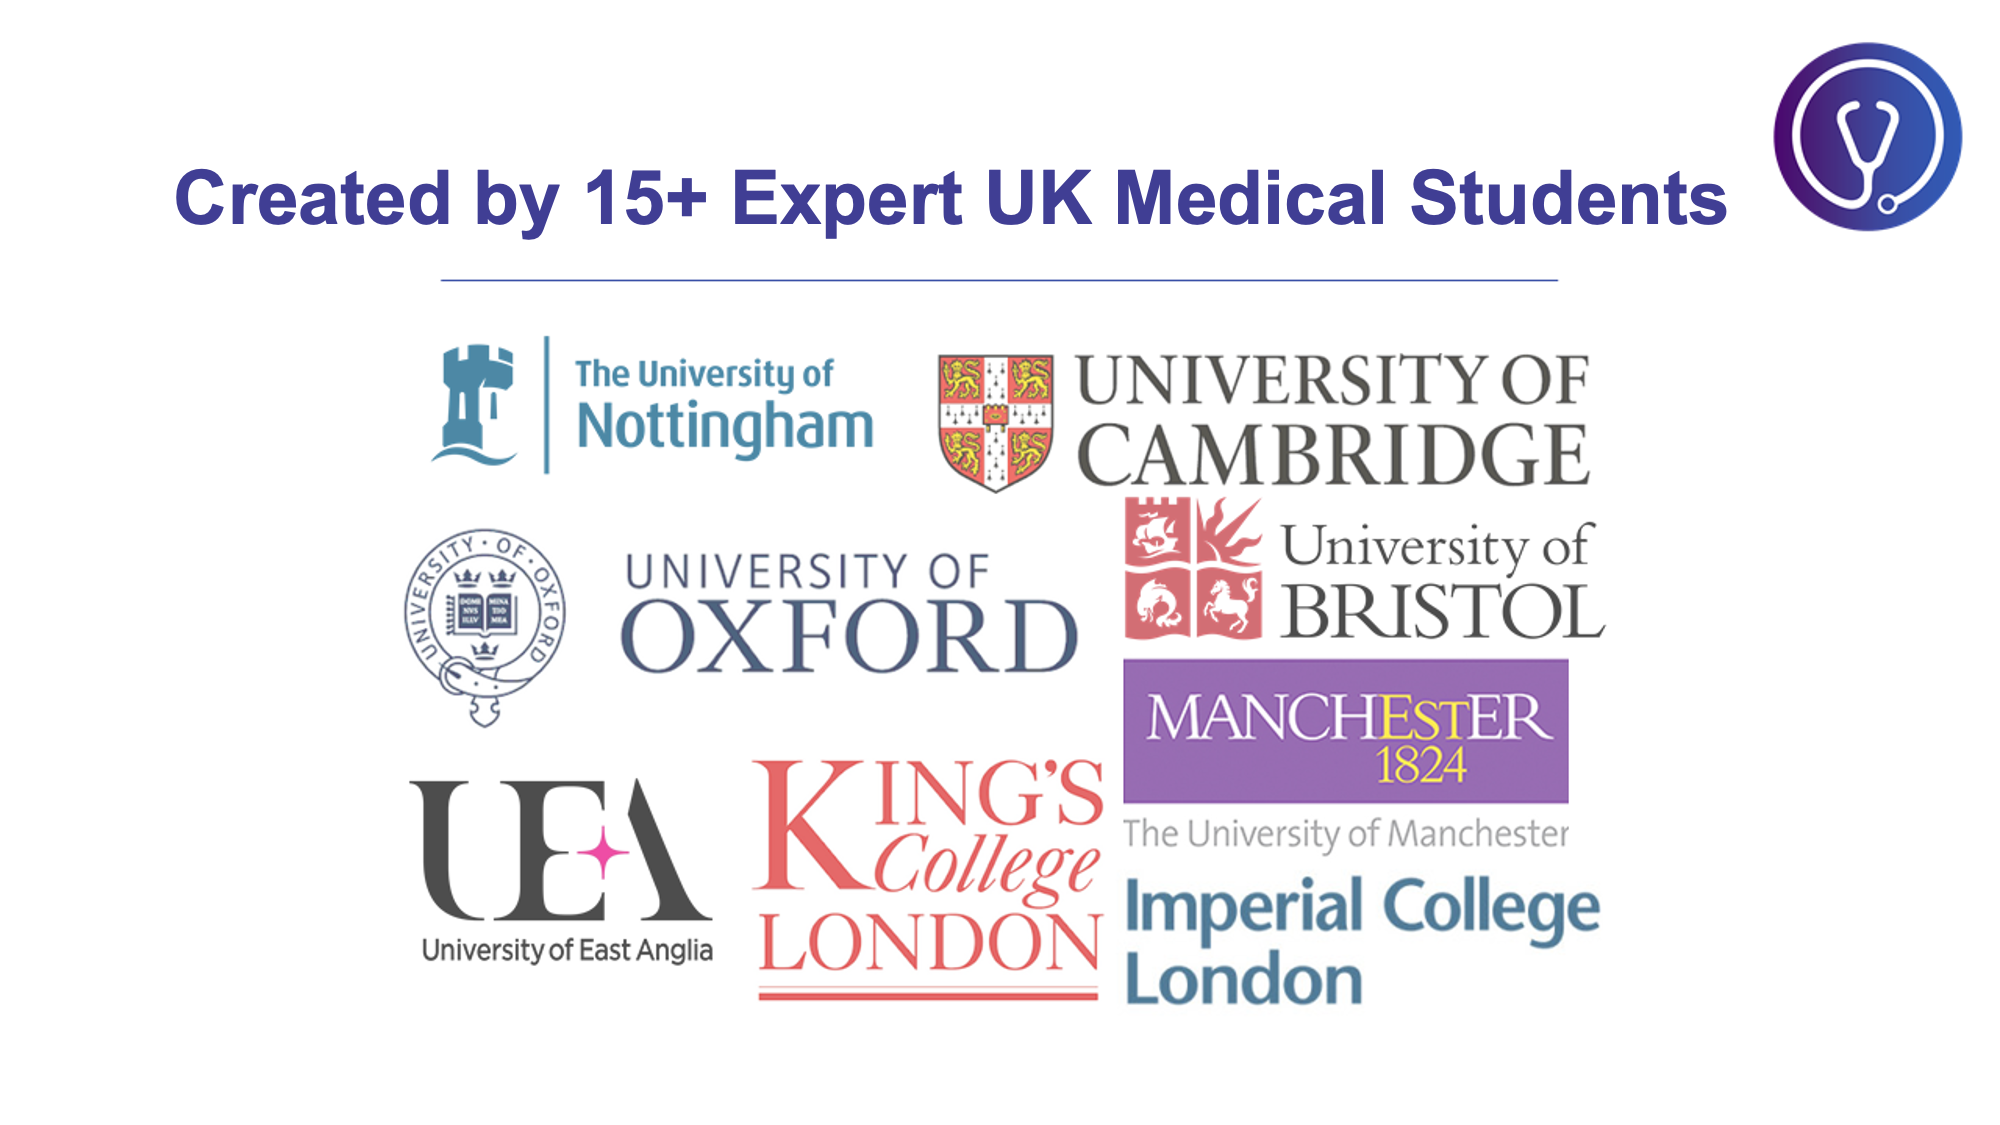 Created by 15+ Expert UK Medical Students